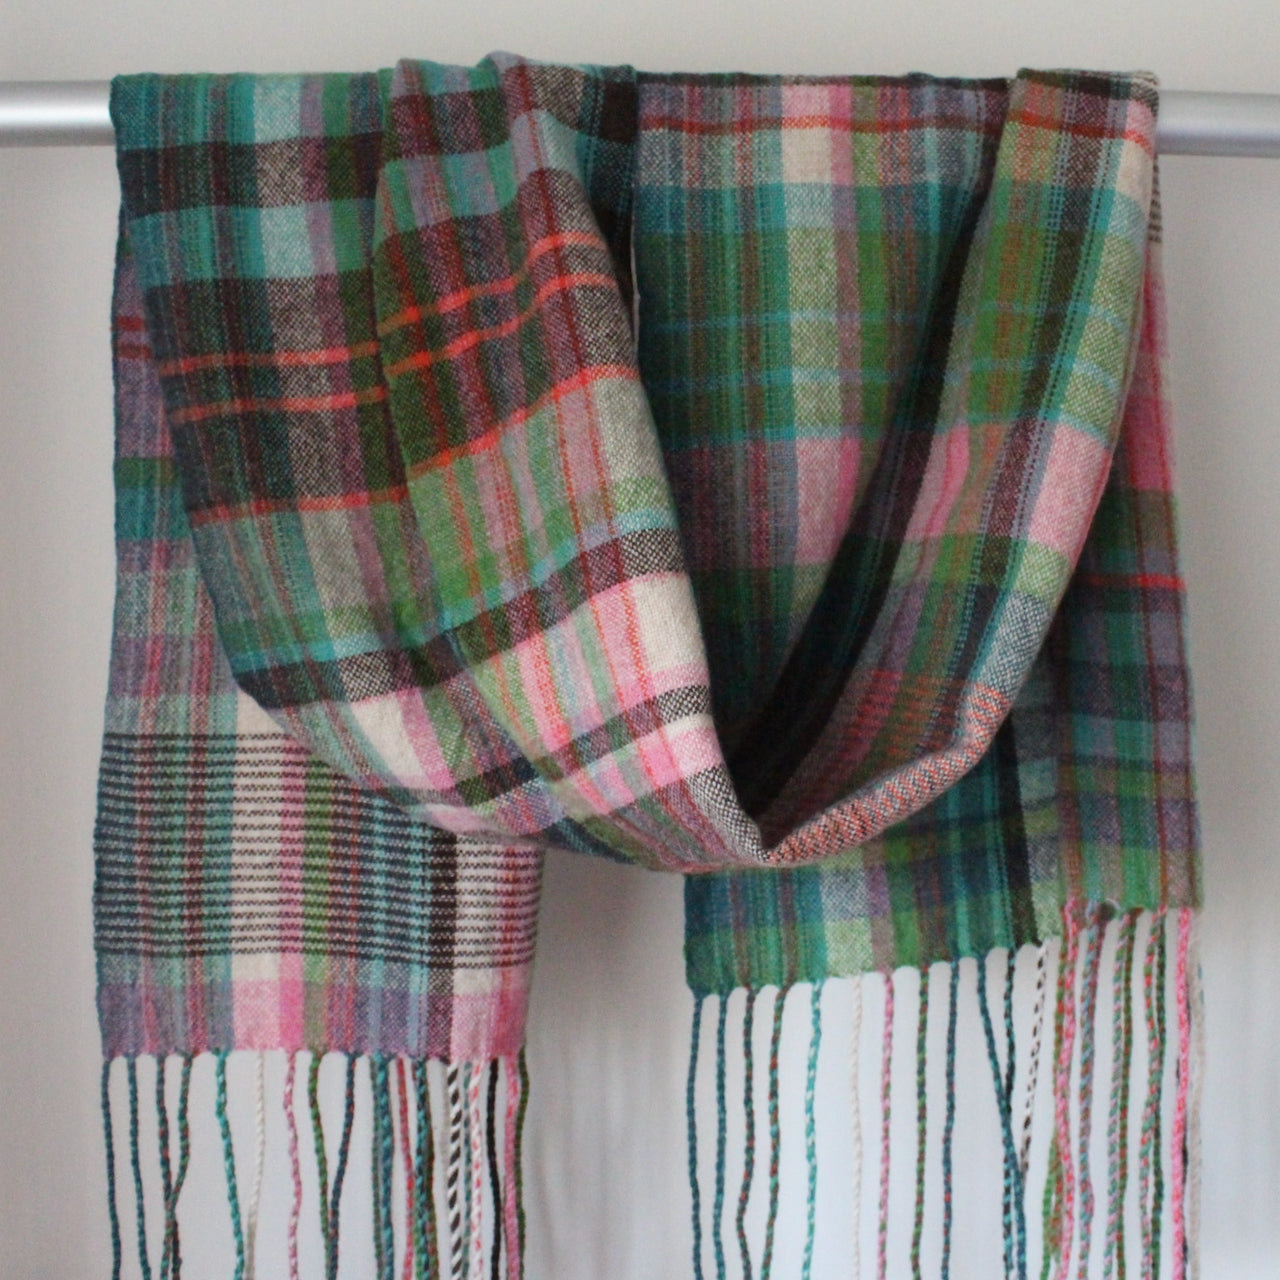 handwoven scarf in shades of pink, green and turquoise hanging over a metal display rail